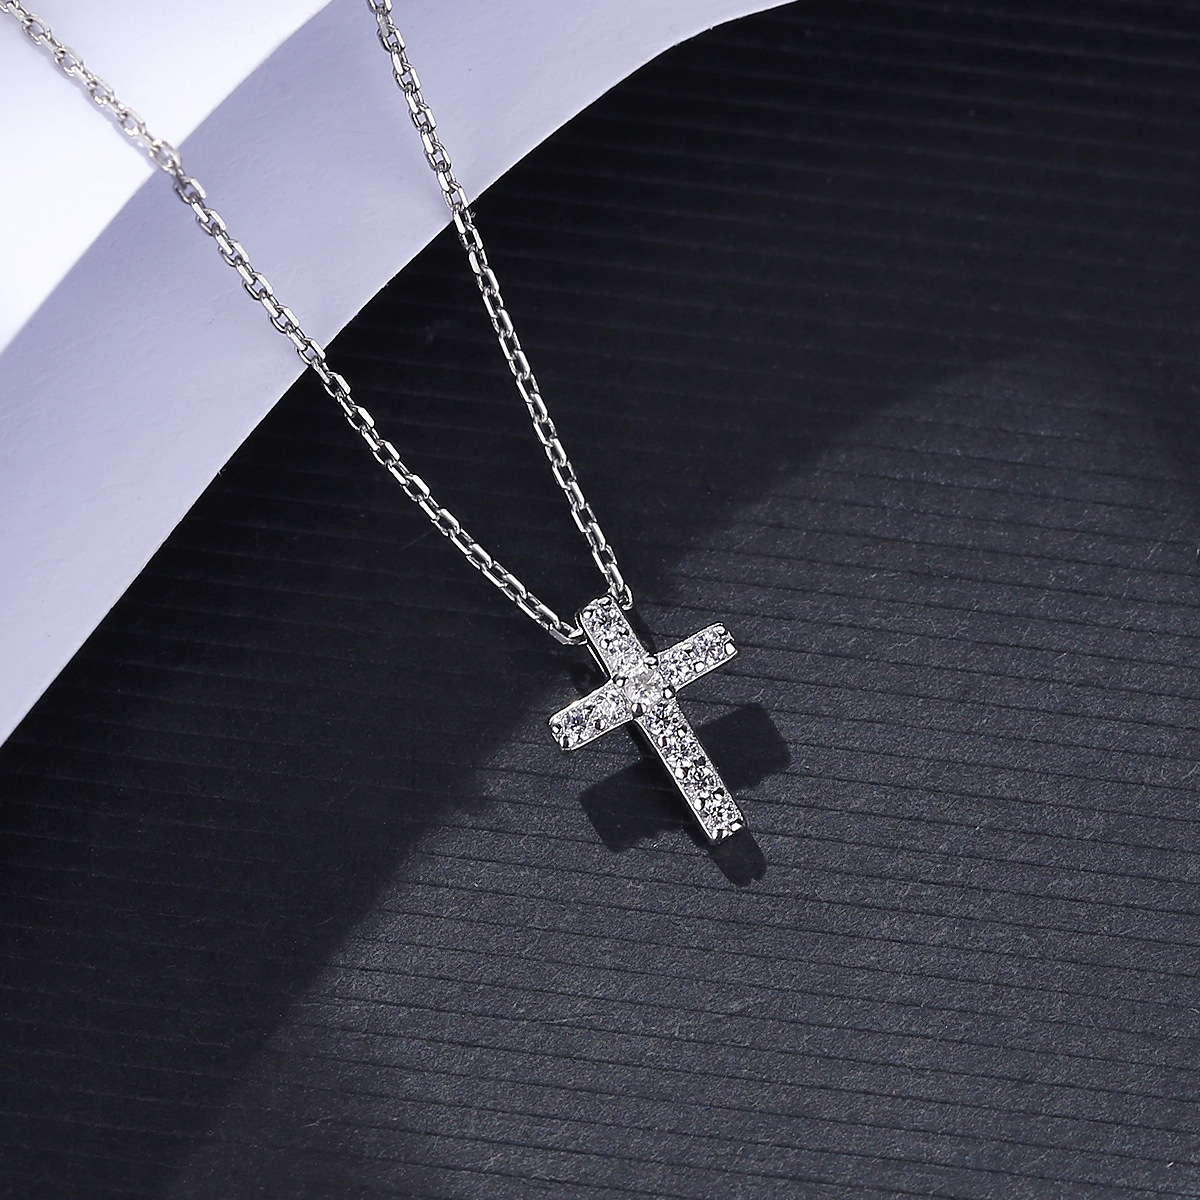 Rhodium Plated Cross Sterling Silver Chain Pendant Necklace